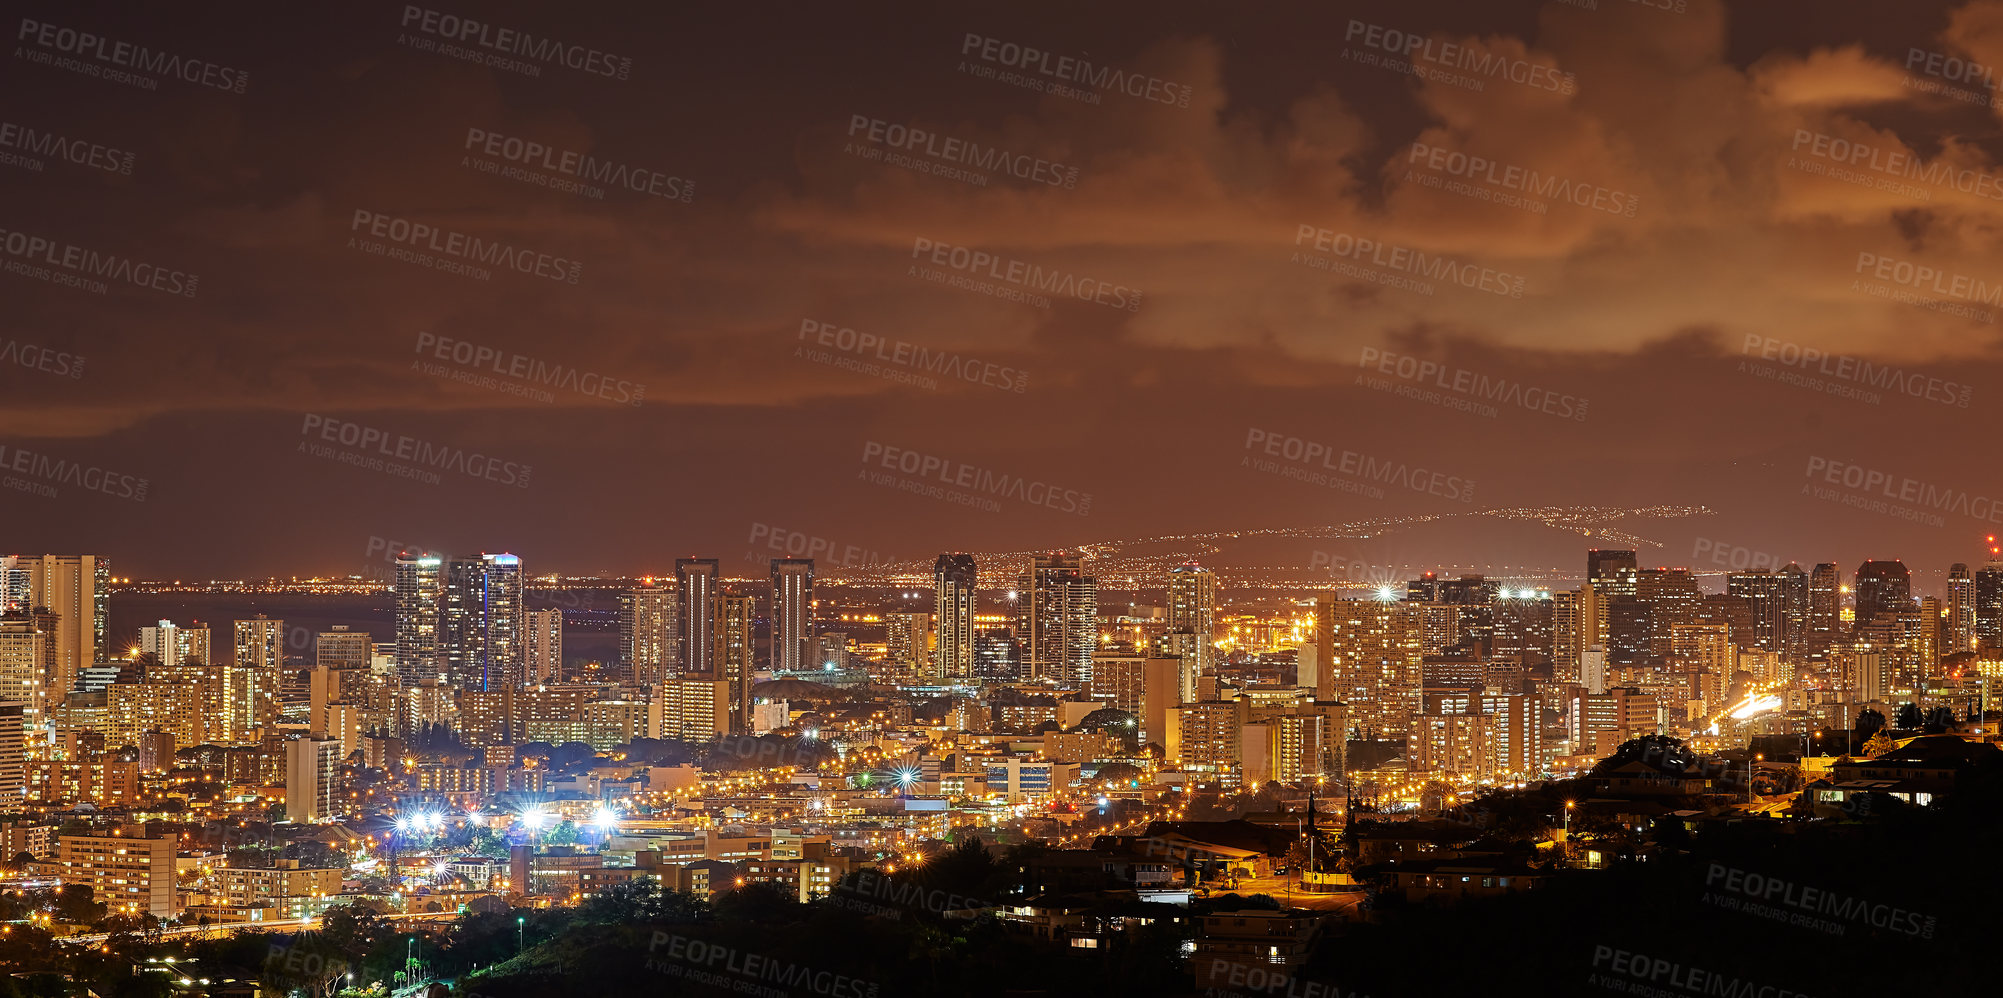 Buy stock photo Copy space with night sky over the view of a coastal city. Scenic landscape of lights illuminating an urban skyline along the sea. Cityscape of Waikiki, Oahu, Hawaii, USA lighting up in the dark